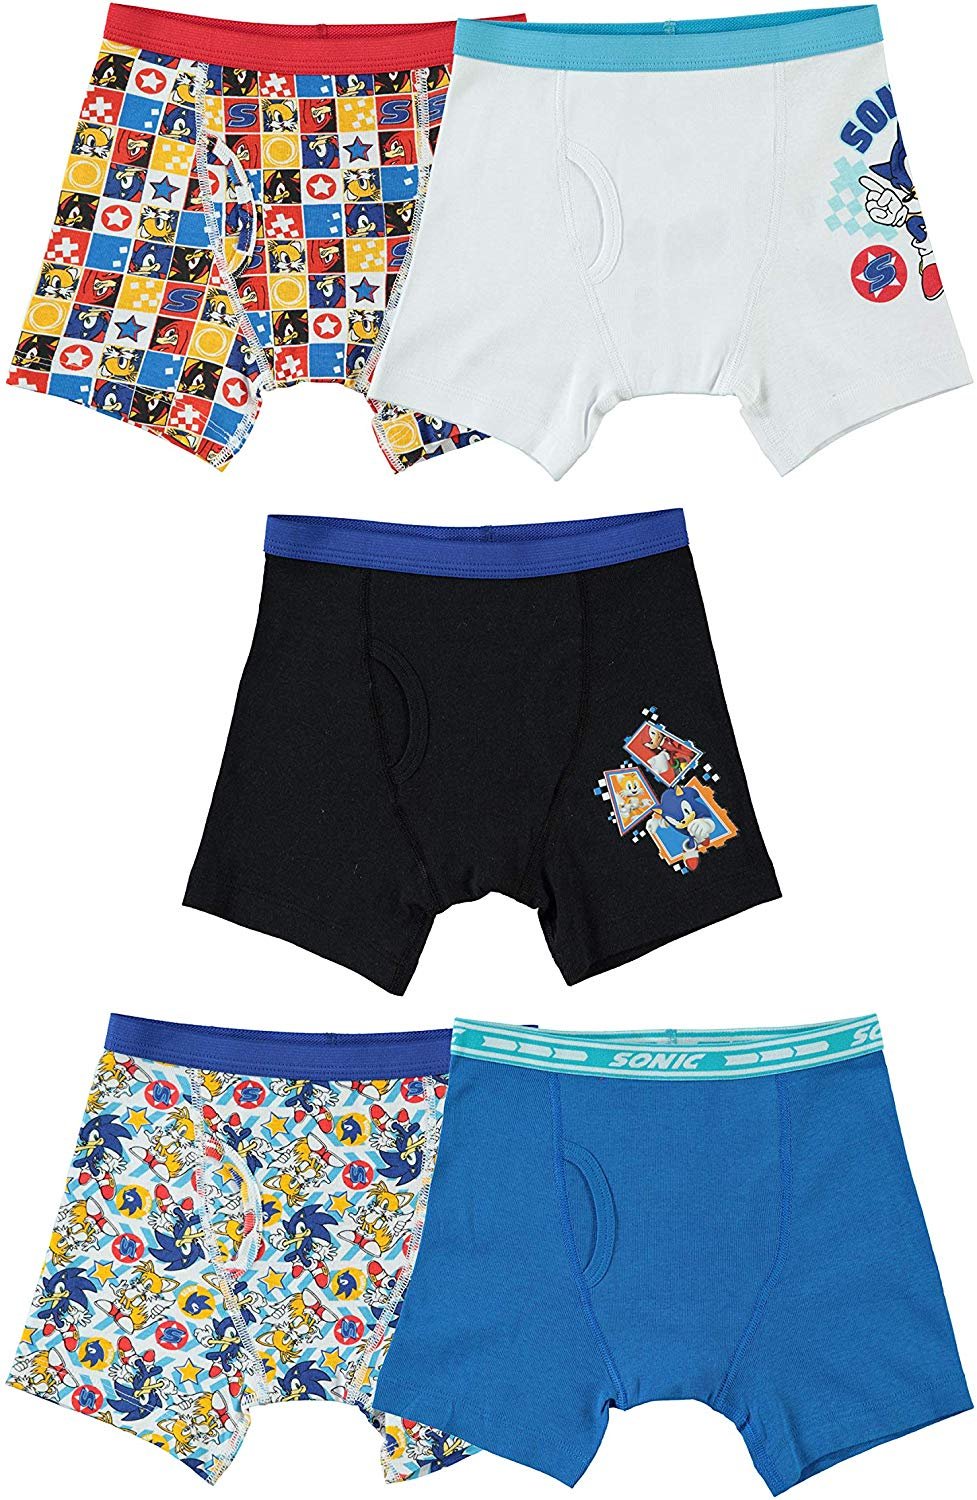 Sonic The Hedgehog Girls' 7-Pack 100% Cotton Underwear Available